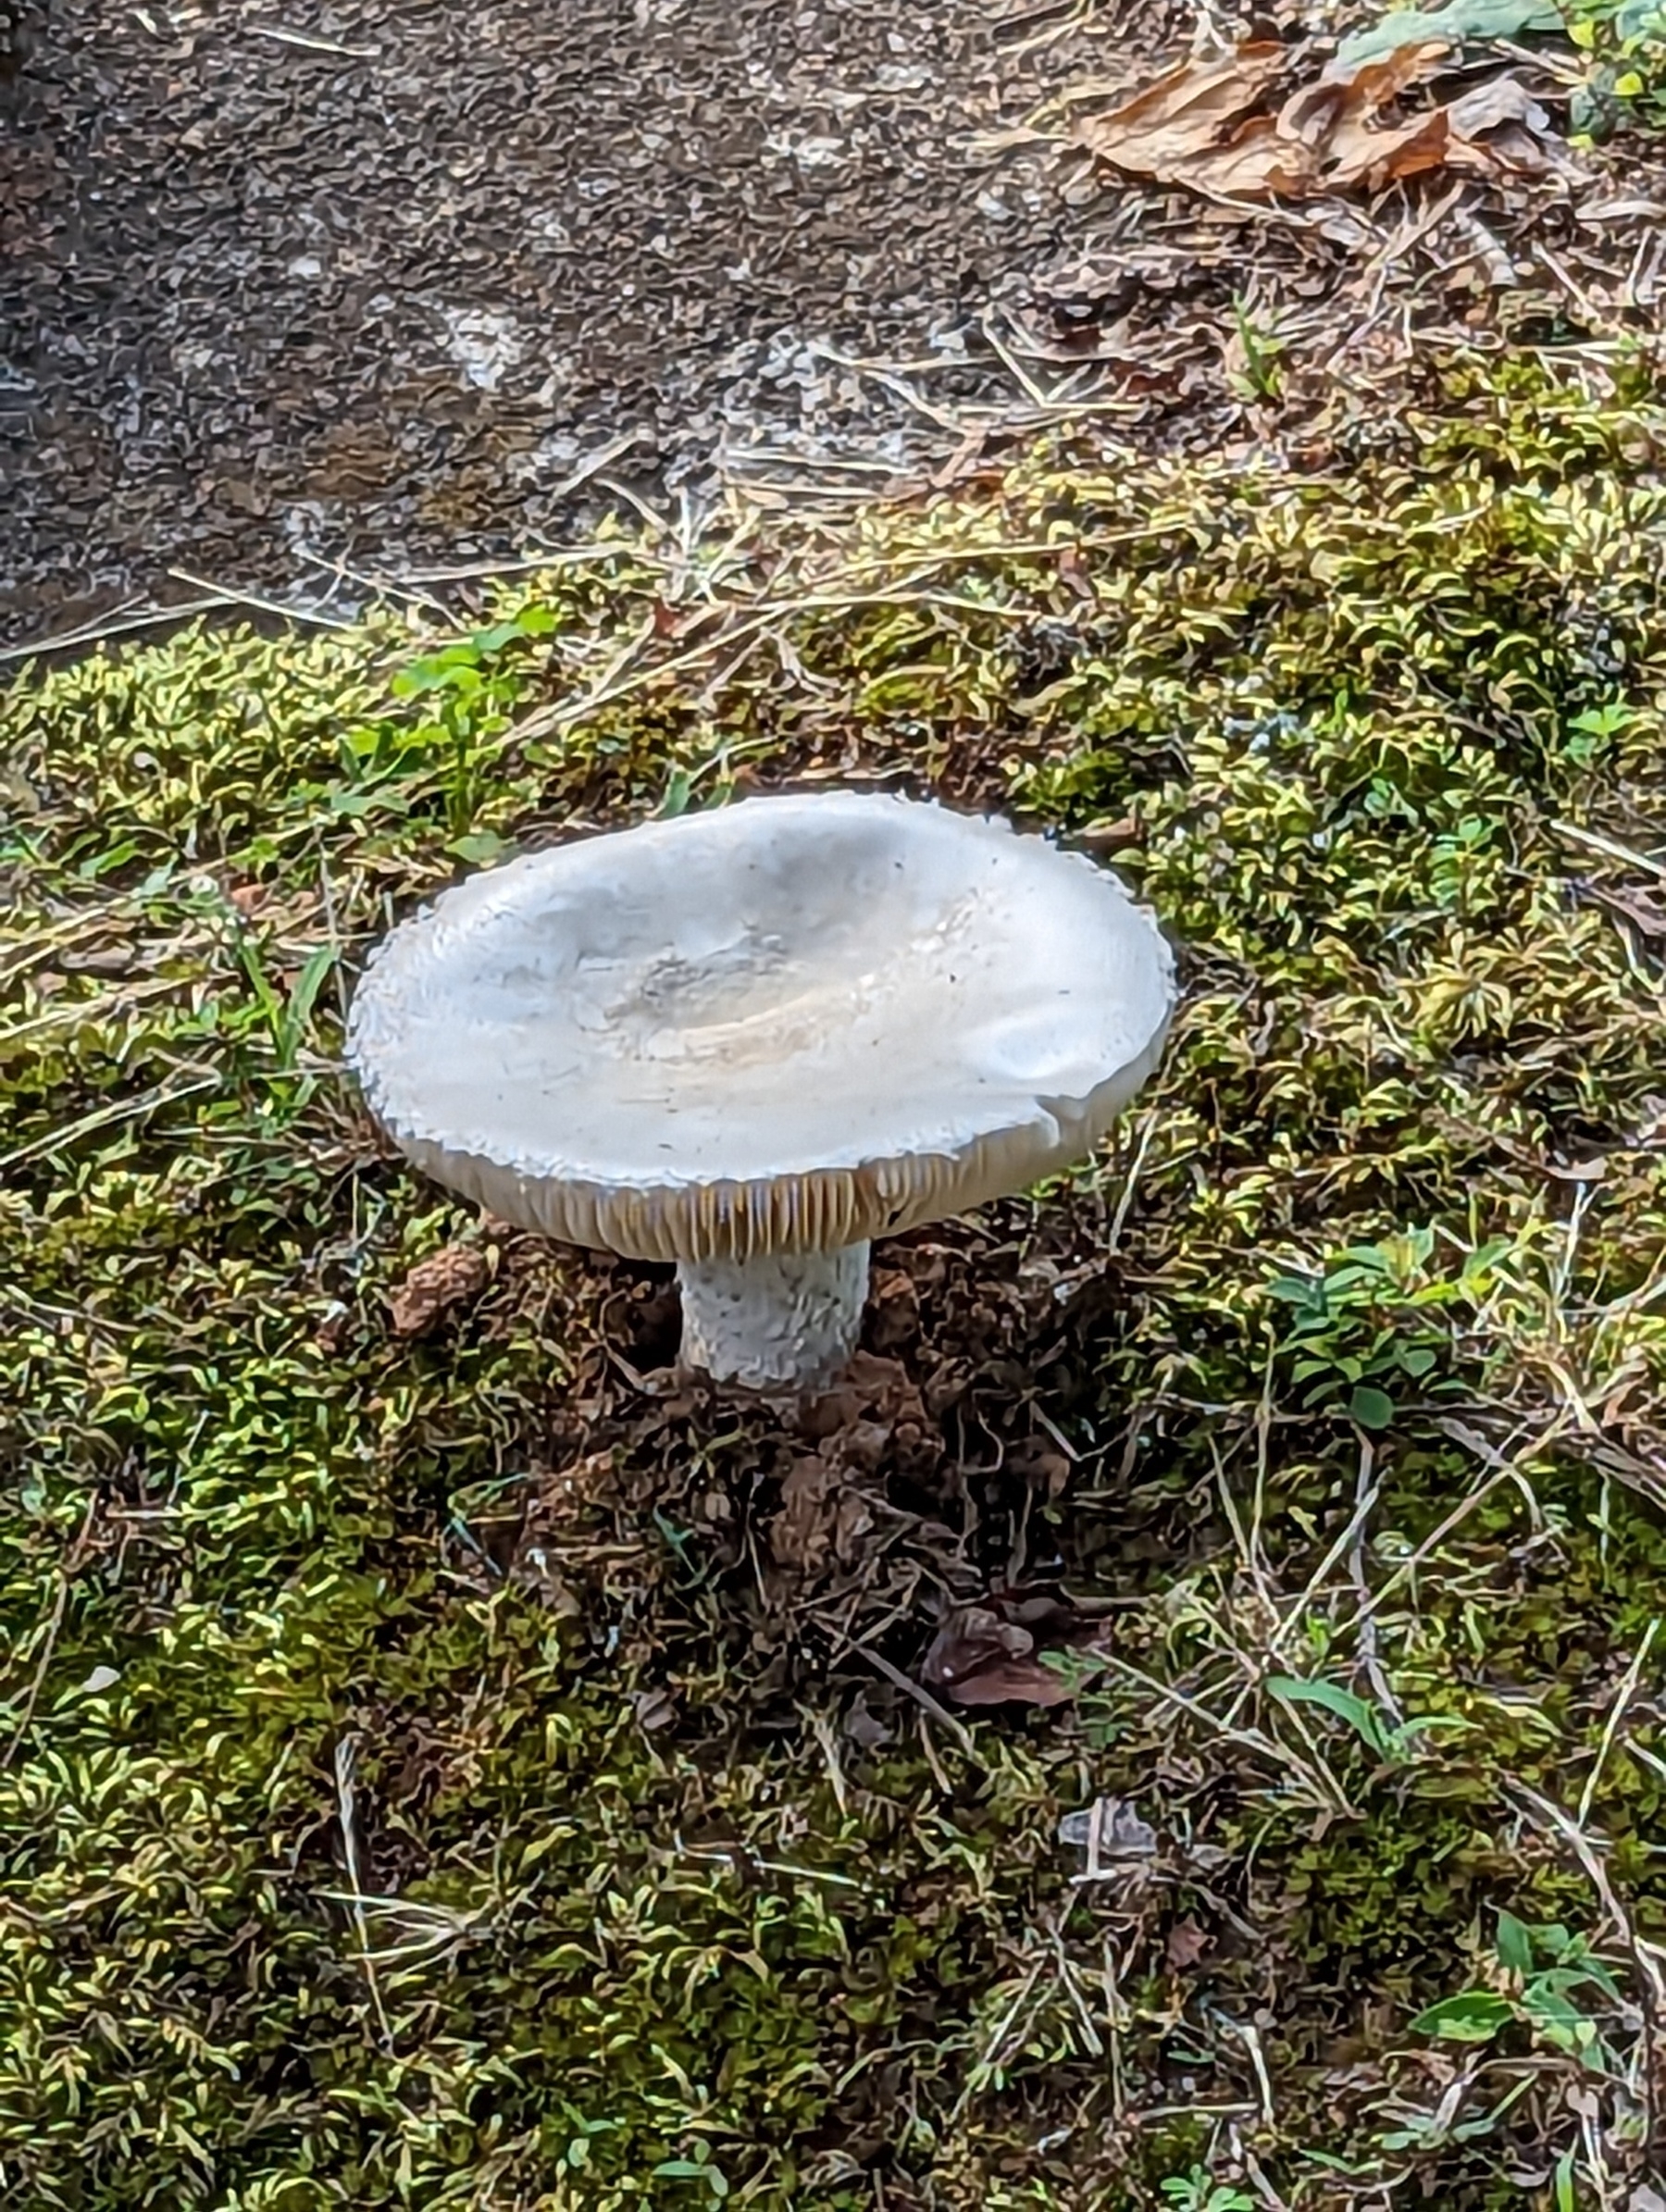 Large, glossy, white mushroom surrounded by grass with water pooling in its upturned cup. 